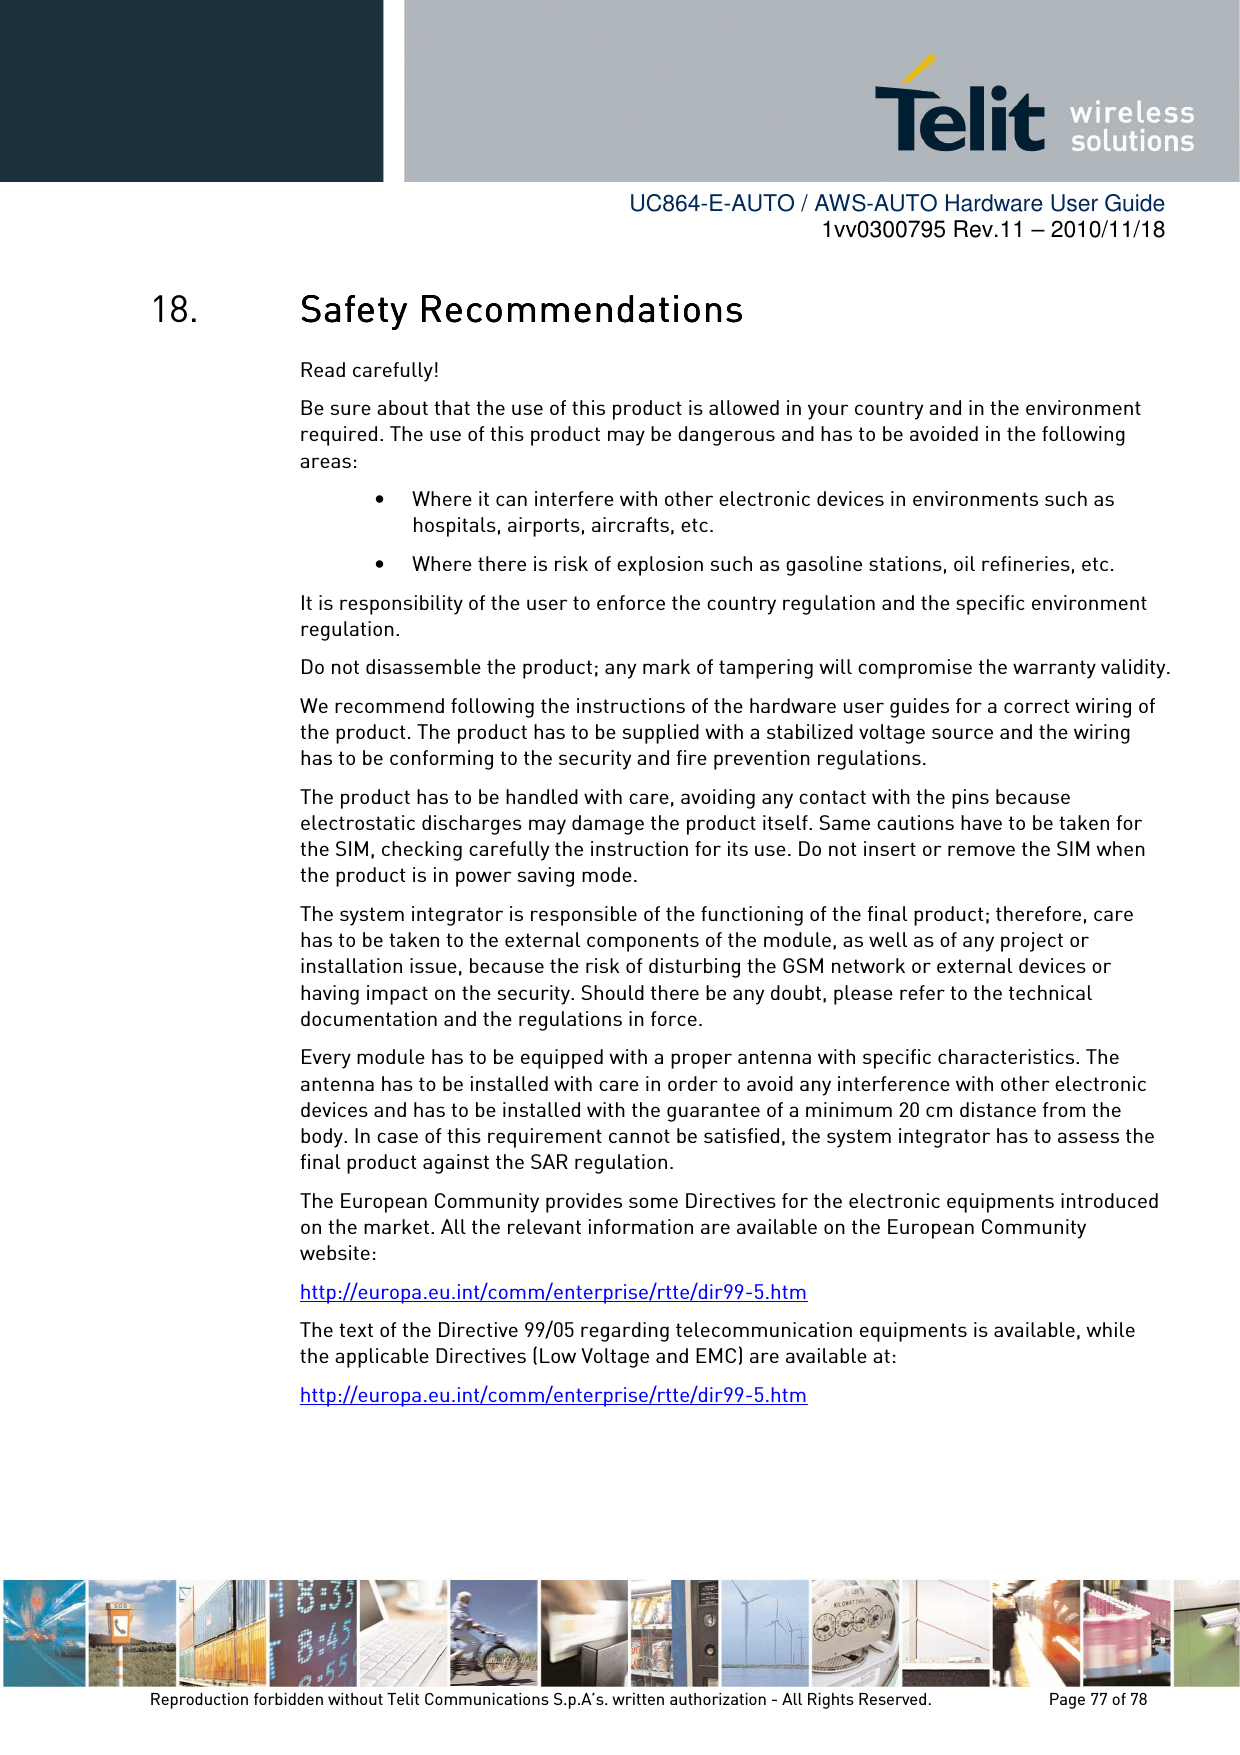        UC864-E-AUTO / AWS-AUTO Hardware User Guide 1vv0300795 Rev.11 – 2010/11/18     Reproduction forbidden without Telit Communications S.p.A’s. written authorization - All Rights Reserved.    Page 77 of 78  18. Safety RSafety RSafety RSafety Recommendationsecommendationsecommendationsecommendations    Read carefully! Be sure about that the use of this product is allowed in your country and in the environment required. The use of this product may be dangerous and has to be avoided in the following areas: • Where it can interfere with other electronic devices in environments such as hospitals, airports, aircrafts, etc. • Where there is risk of explosion such as gasoline stations, oil refineries, etc.  It is responsibility of the user to enforce the country regulation and the specific environment regulation. Do not disassemble the product; any mark of tampering will compromise the warranty validity. We recommend following the instructions of the hardware user guides for a correct wiring of the product. The product has to be supplied with a stabilized voltage source and the wiring has to be conforming to the security and fire prevention regulations. The product has to be handled with care, avoiding any contact with the pins because electrostatic discharges may damage the product itself. Same cautions have to be taken for the SIM, checking carefully the instruction for its use. Do not insert or remove the SIM when the product is in power saving mode. The system integrator is responsible of the functioning of the final product; therefore, care has to be taken to the external components of the module, as well as of any project or installation issue, because the risk of disturbing the GSM network or external devices or having impact on the security. Should there be any doubt, please refer to the technical documentation and the regulations in force. Every module has to be equipped with a proper antenna with specific characteristics. The antenna has to be installed with care in order to avoid any interference with other electronic devices and has to be installed with the guarantee of a minimum 20 cm distance from the body. In case of this requirement cannot be satisfied, the system integrator has to assess the final product against the SAR regulation. The European Community provides some Directives for the electronic equipments introduced on the market. All the relevant information are available on the European Community website: http://europa.eu.int/comm/enterprise/rtte/dir99-5.htm The text of the Directive 99/05 regarding telecommunication equipments is available, while the applicable Directives (Low Voltage and EMC) are available at: http://europa.eu.int/comm/enterprise/rtte/dir99-5.htm  